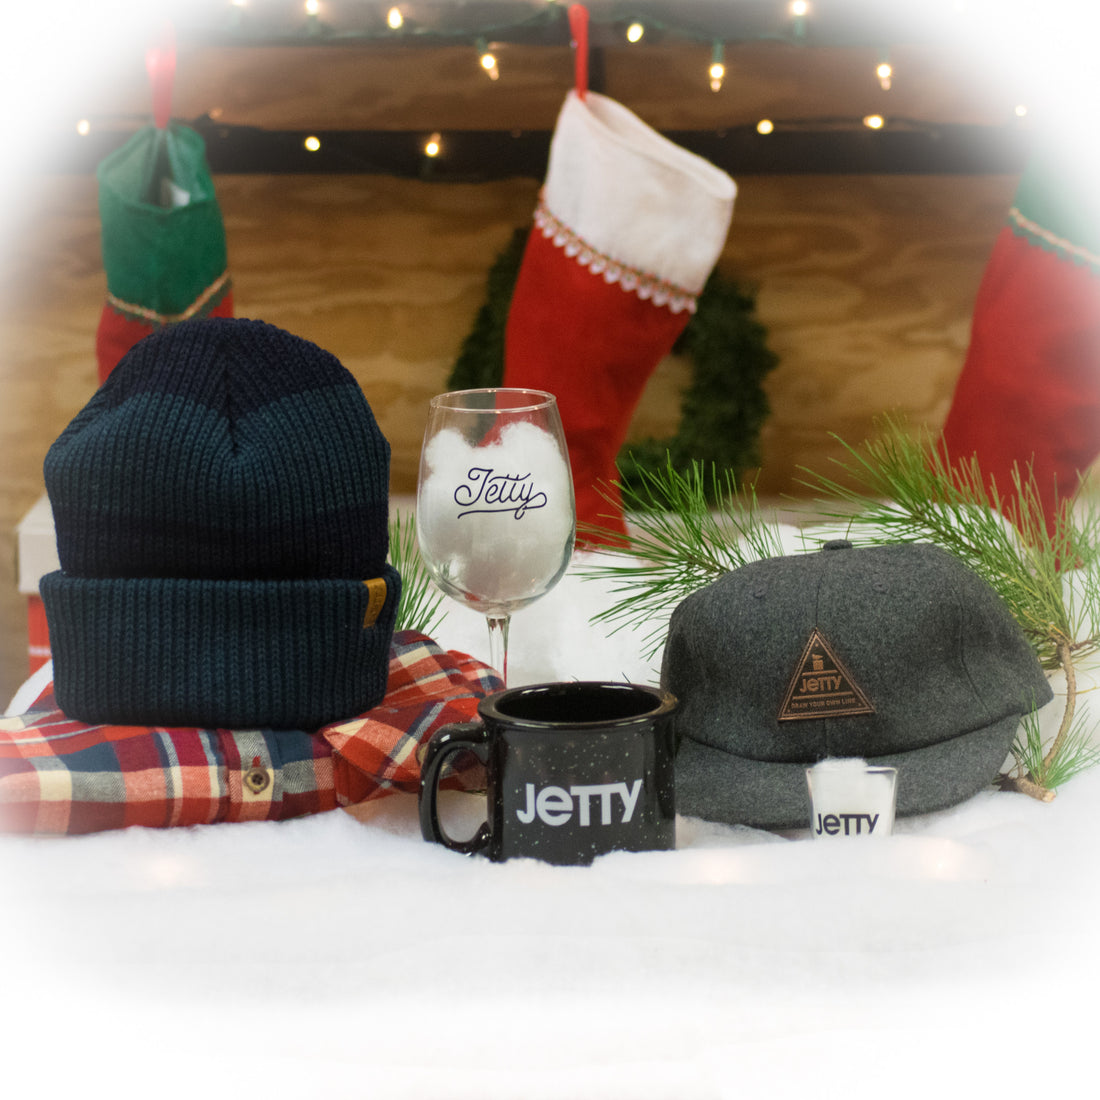 Jetty Holiday Sale